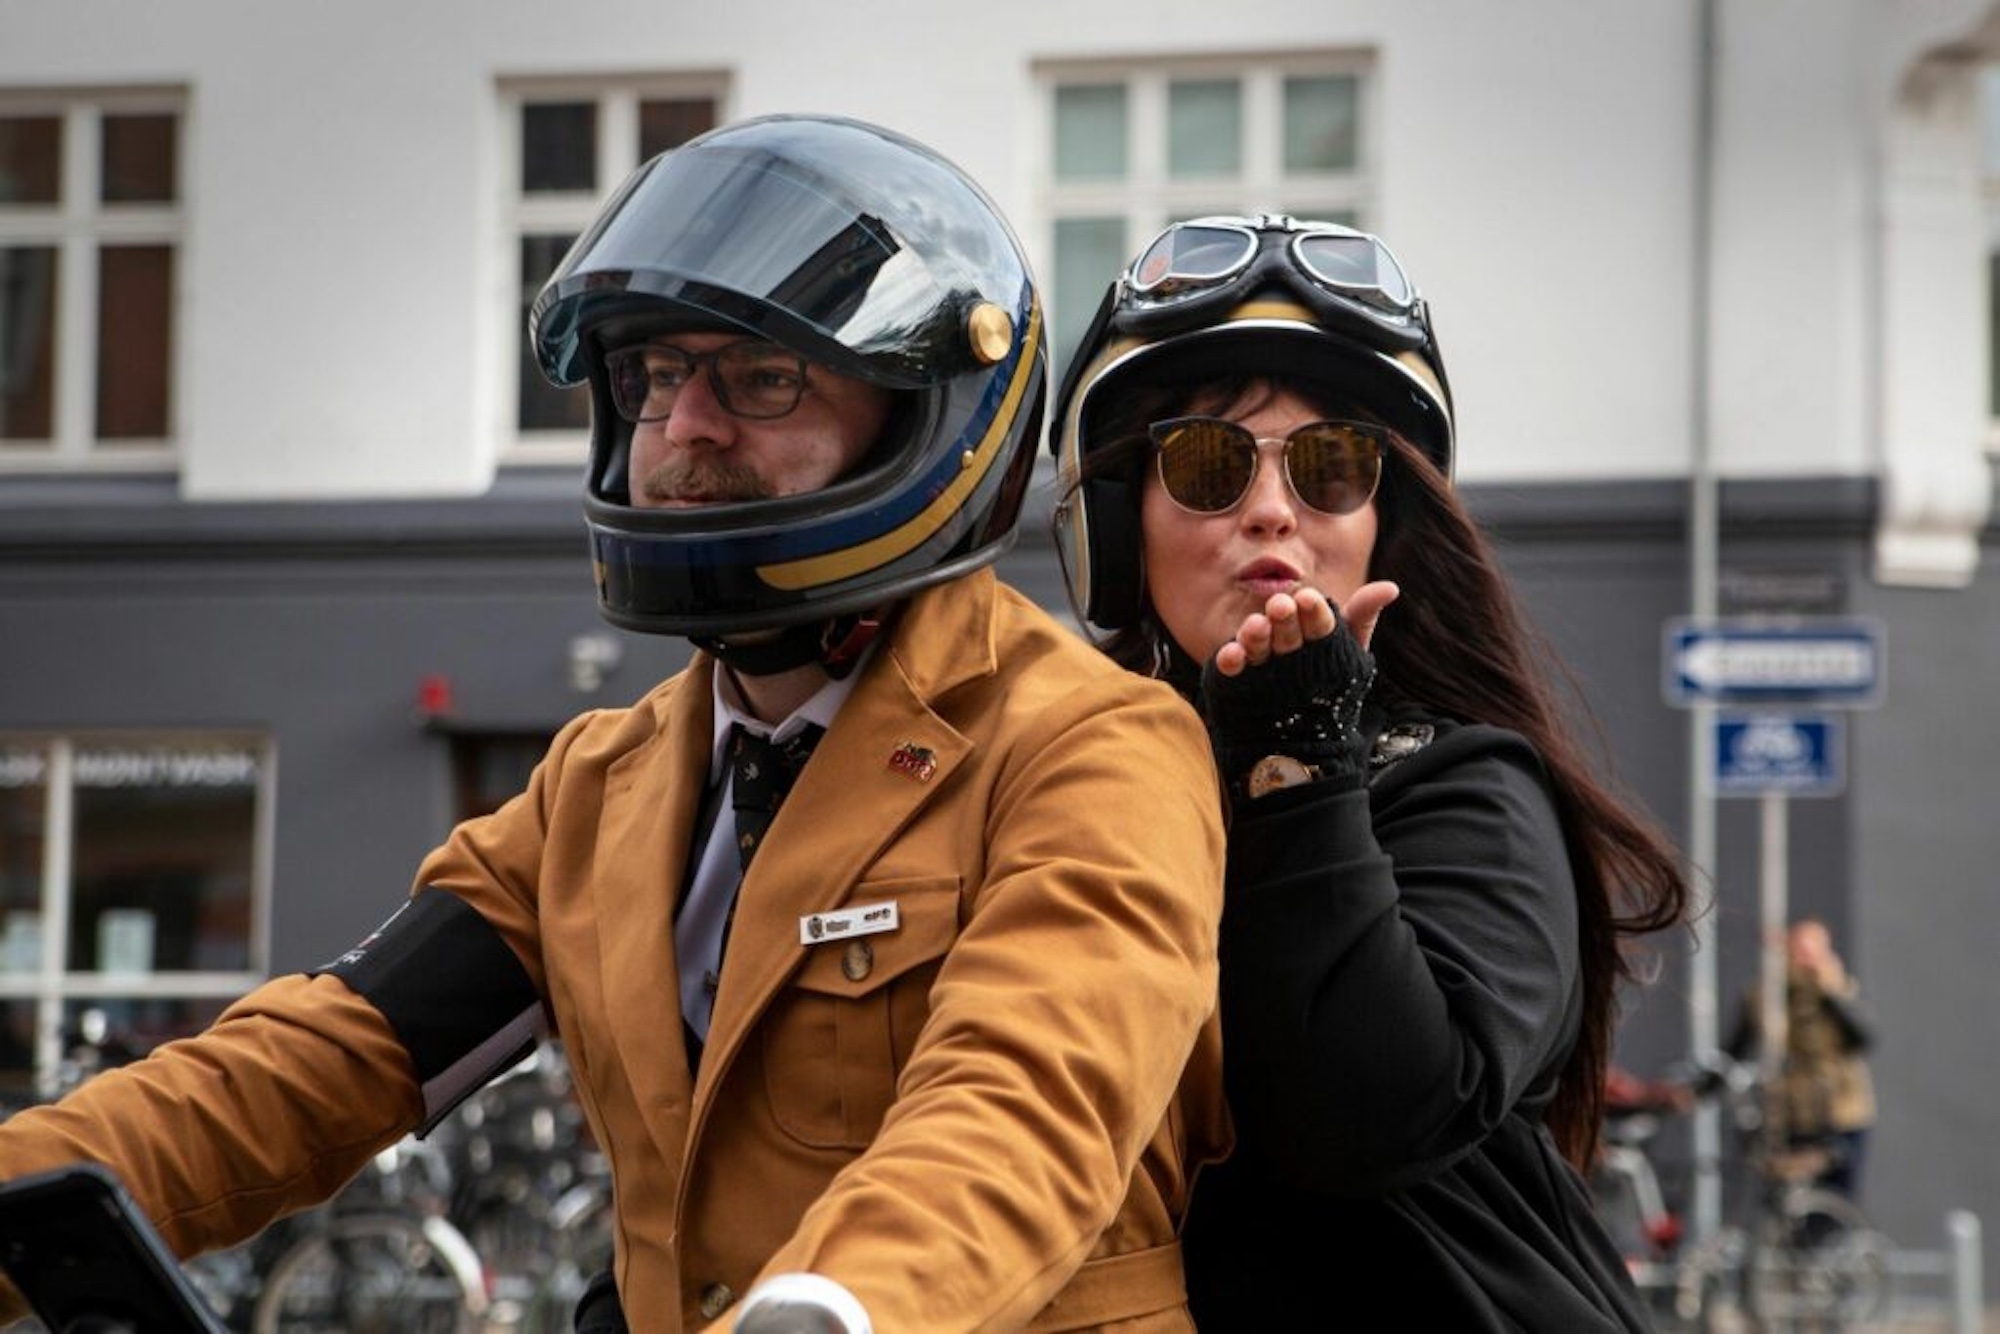 A man and a woman on a motorcycle.